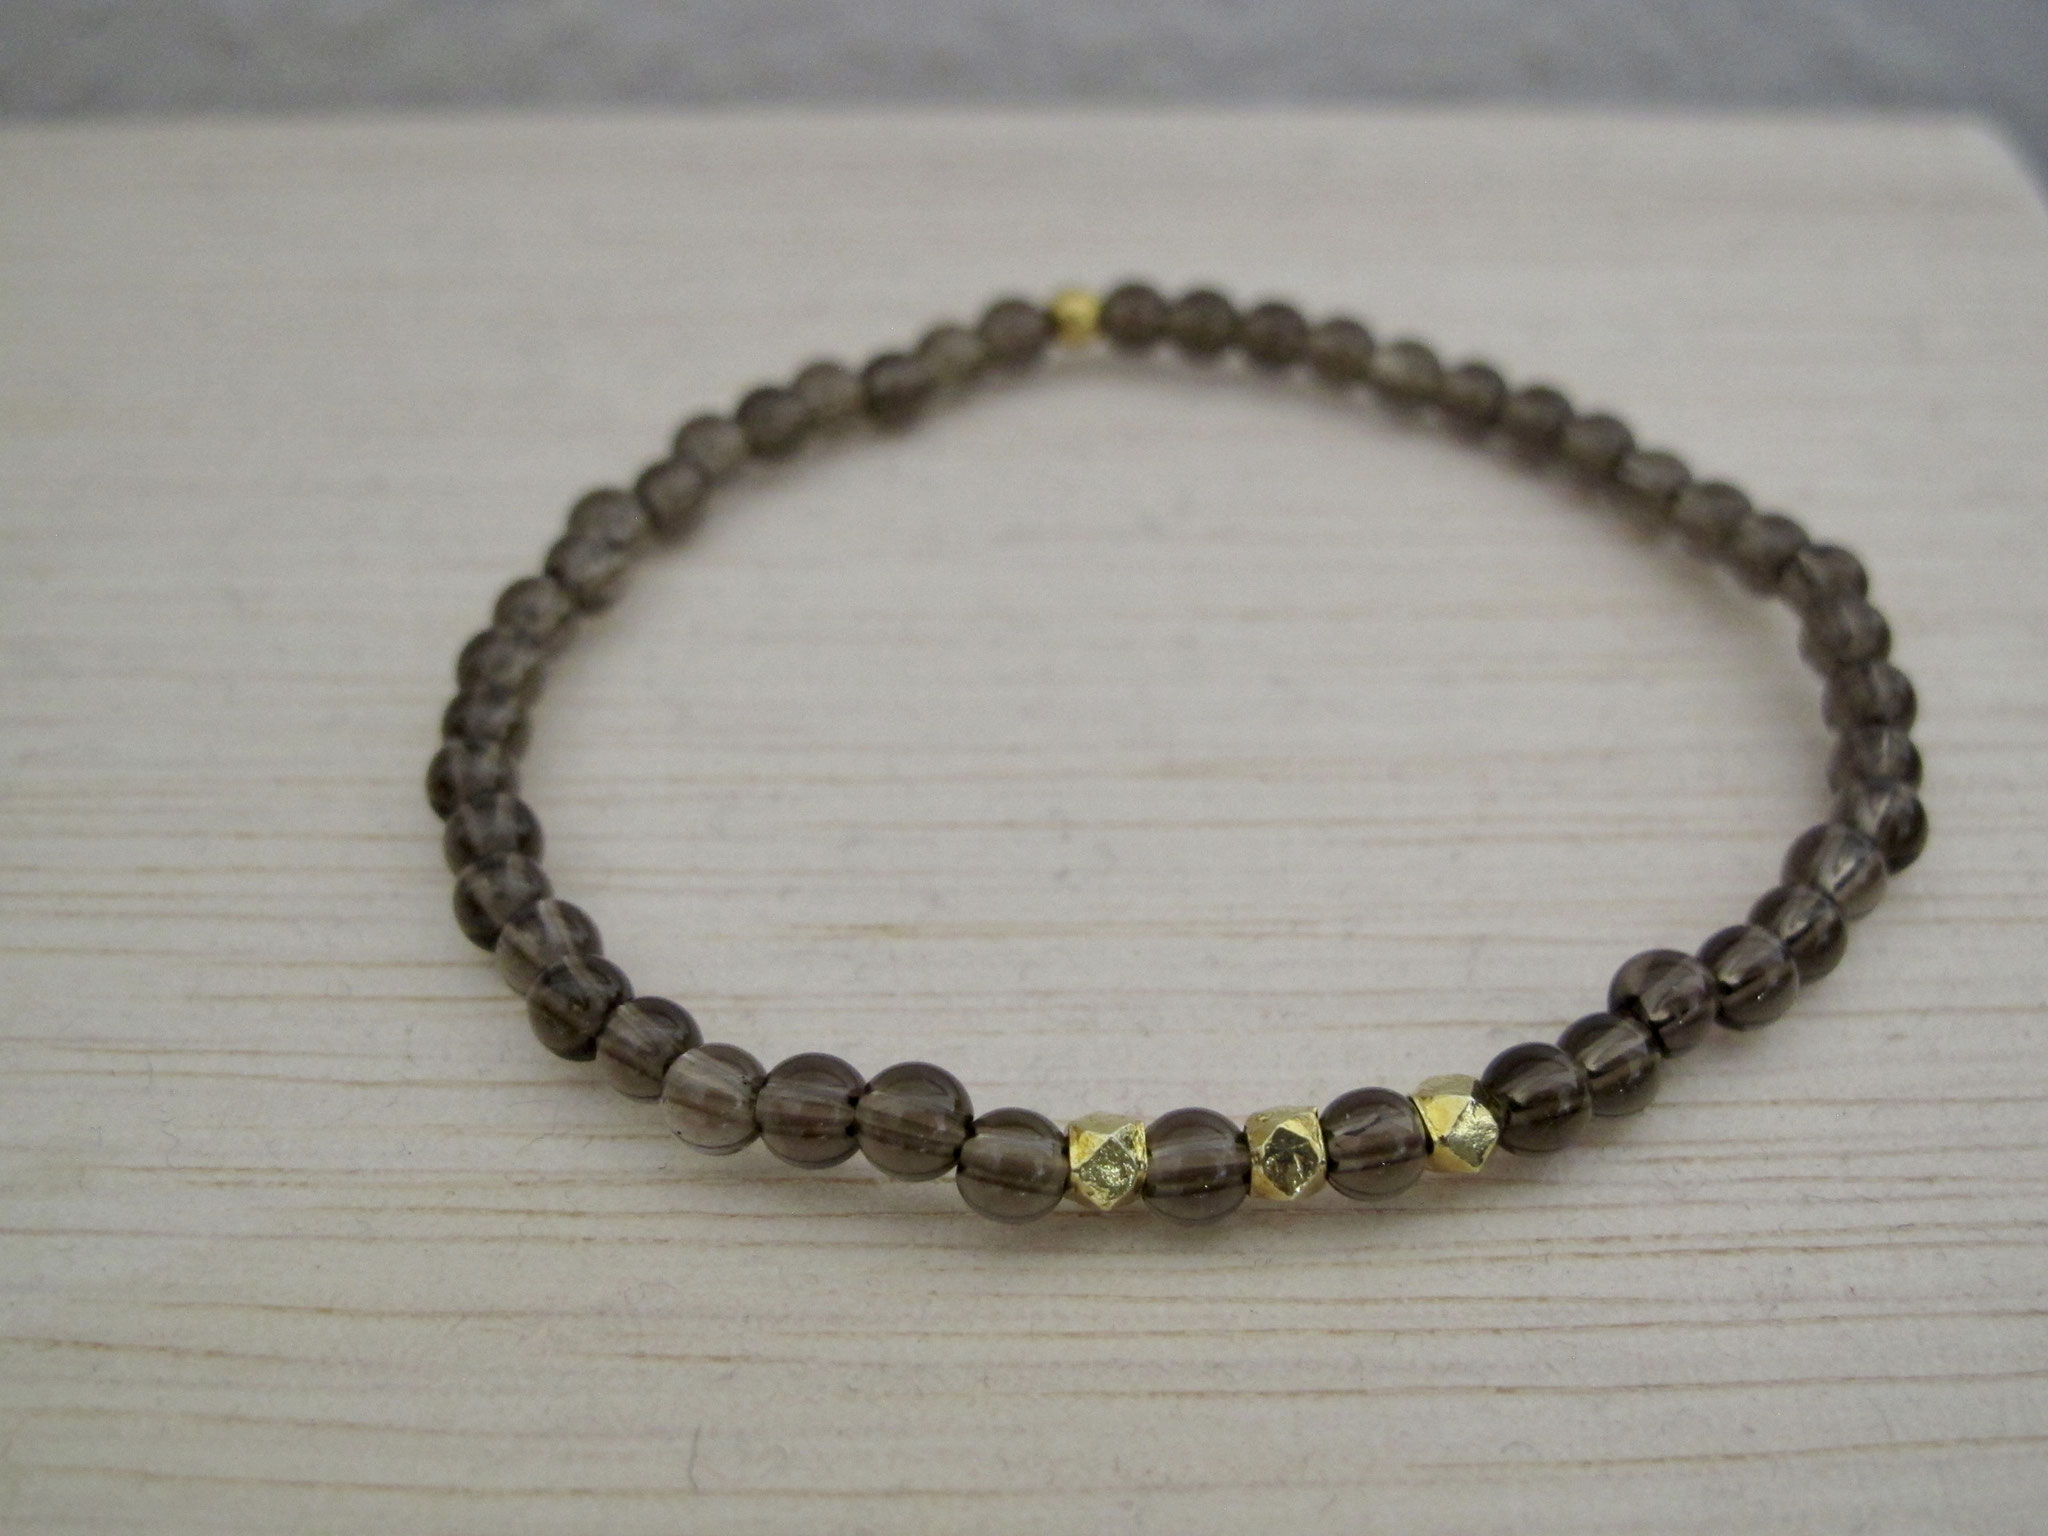 Smoky quartz with gold-plated beads (sold)